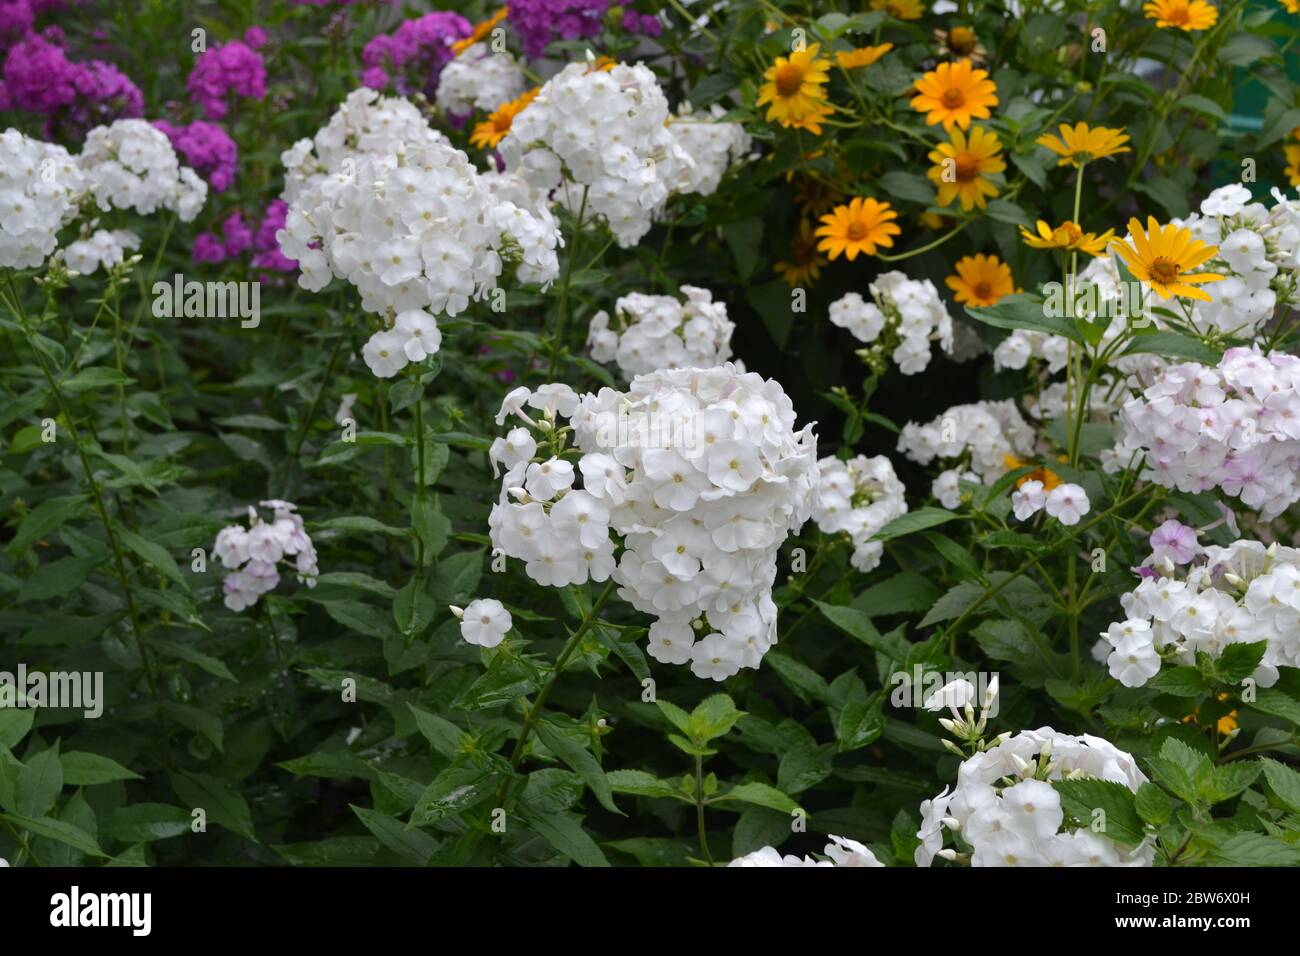 Green. Gardening. Phlox flower. Perennial herbaceous plant. High branches. White flowers Stock Photo